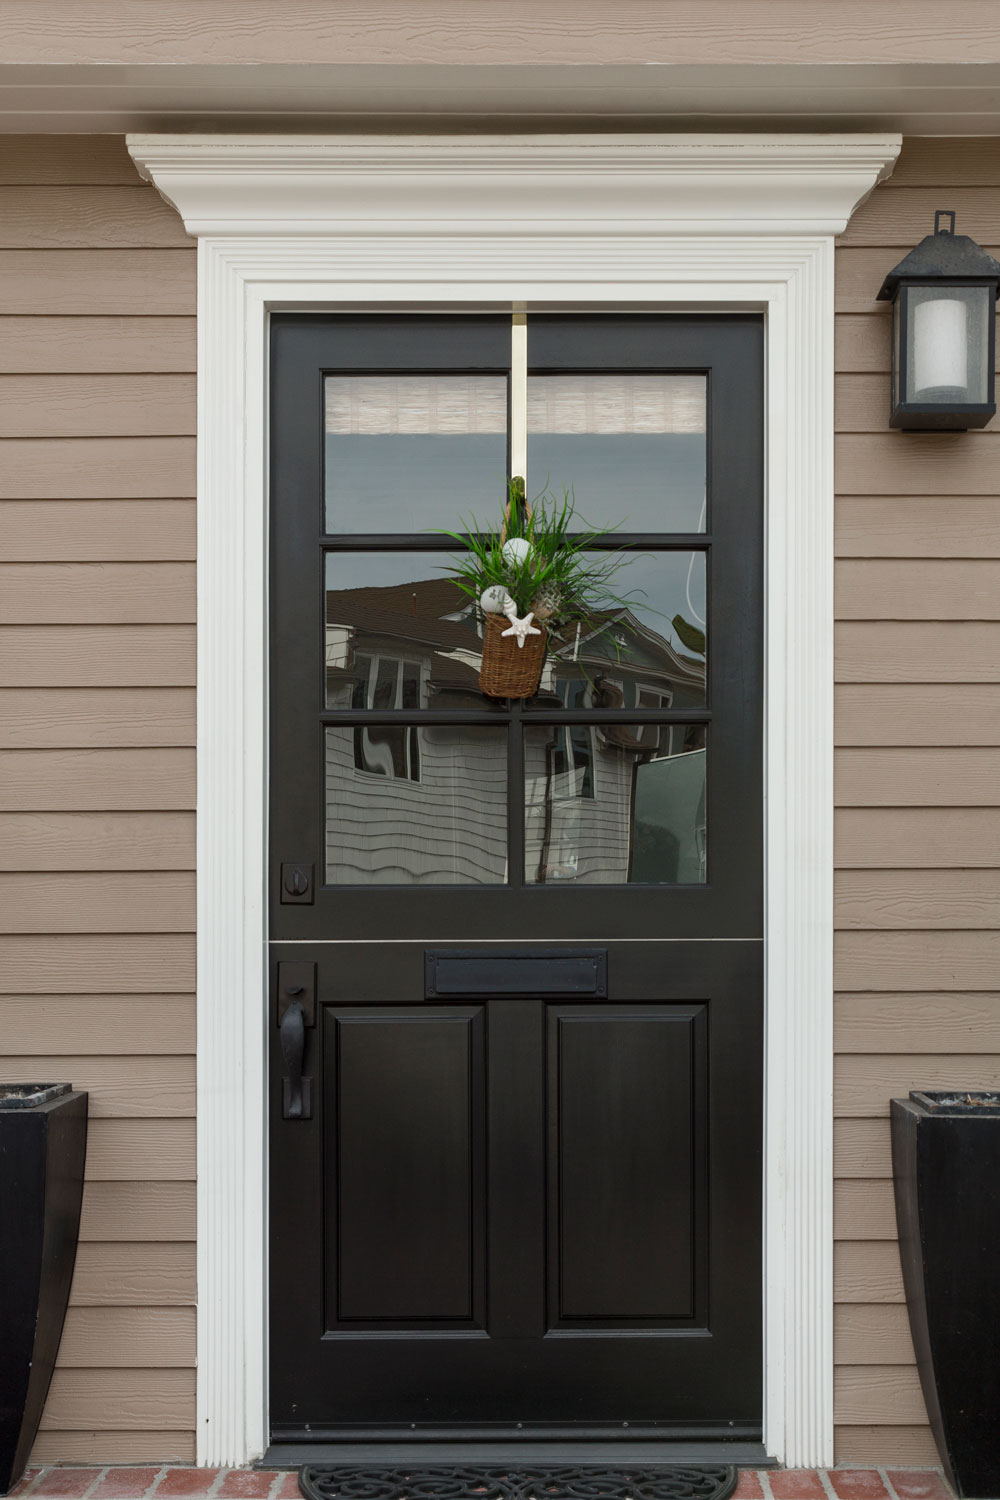 A black front door with a decorative plant and white door trims